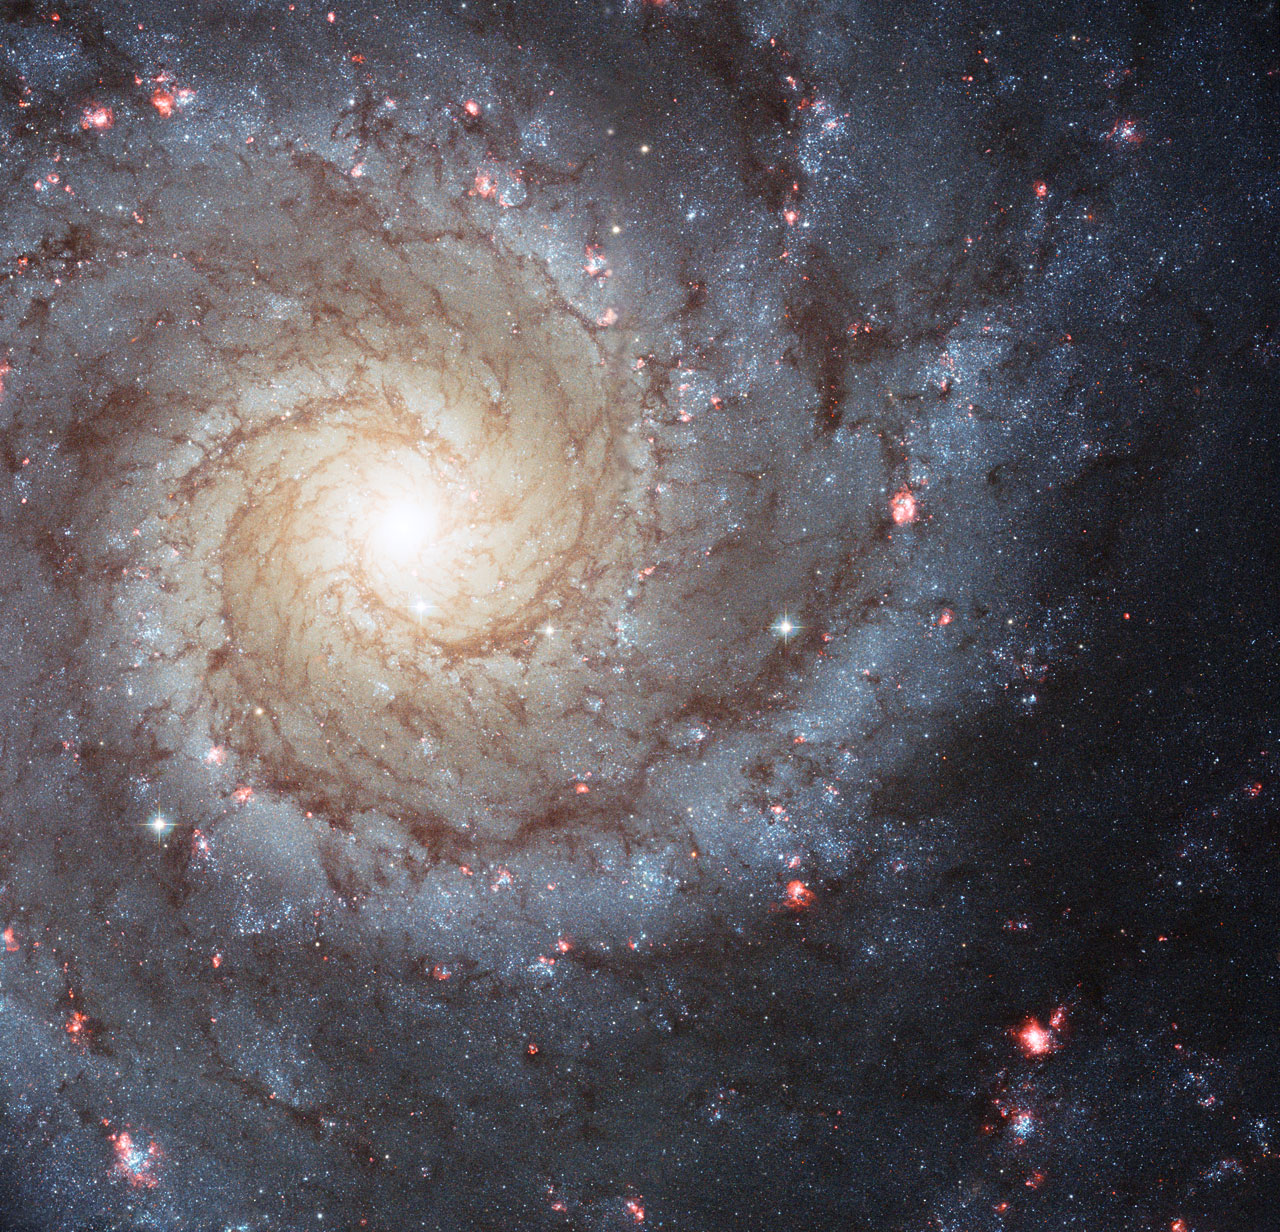 In the new Hubble image of the galaxy M74 we can also see a smattering of bright pink regions decorating the spiral arms. These are huge, relatively short-lived, clouds of hydrogen gas which glow due to the strong radiation from hot, young stars embedded within them; glowing pink regions of ionized hydrogen (hydrogen that has lost its electrons). These regions of star formation show an excess of light at ultraviolet wavelengths and astronomers call them HII regions.